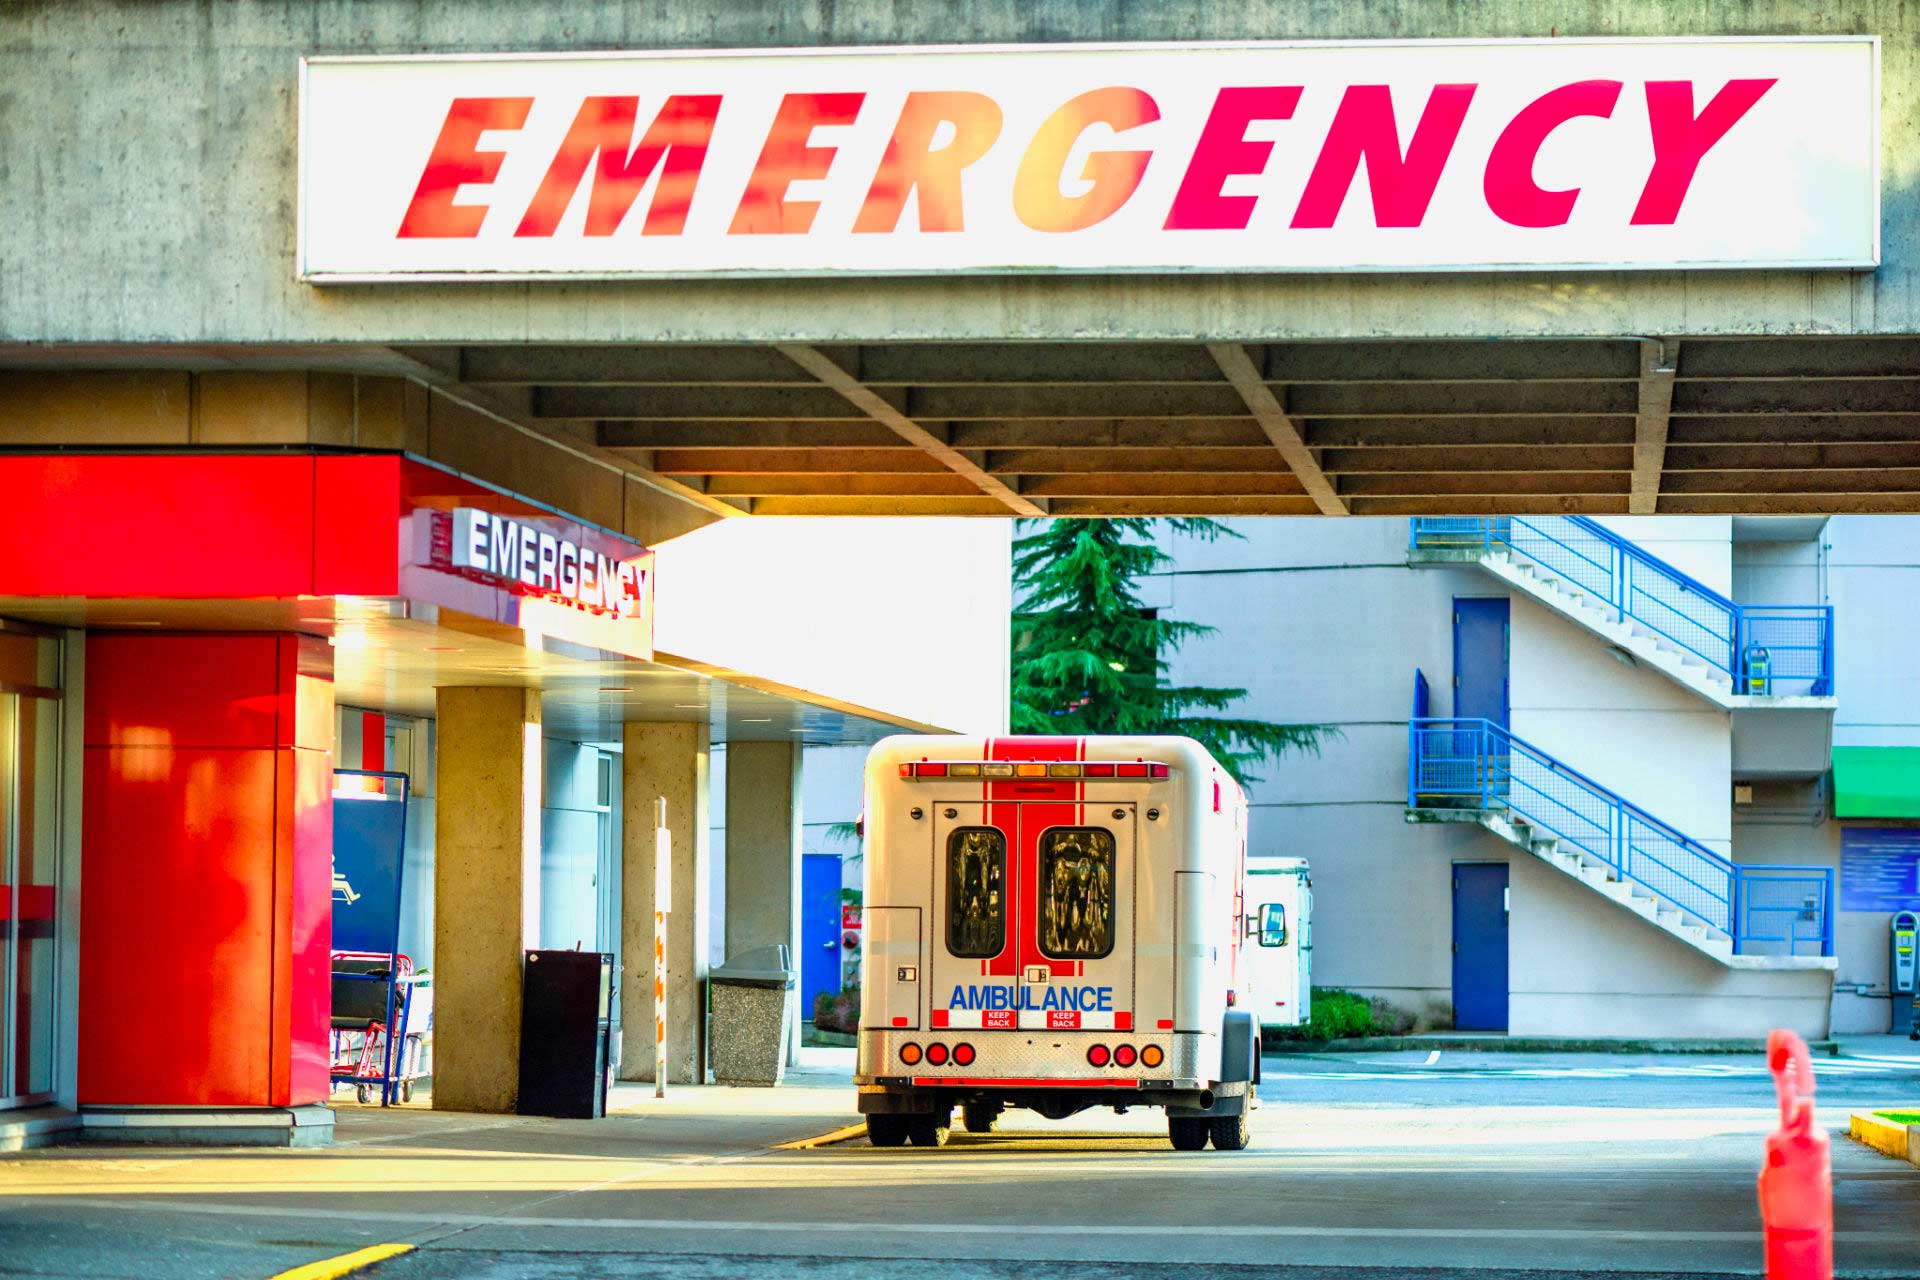 Hospital Emergency Room doorway with ambulance parked in front